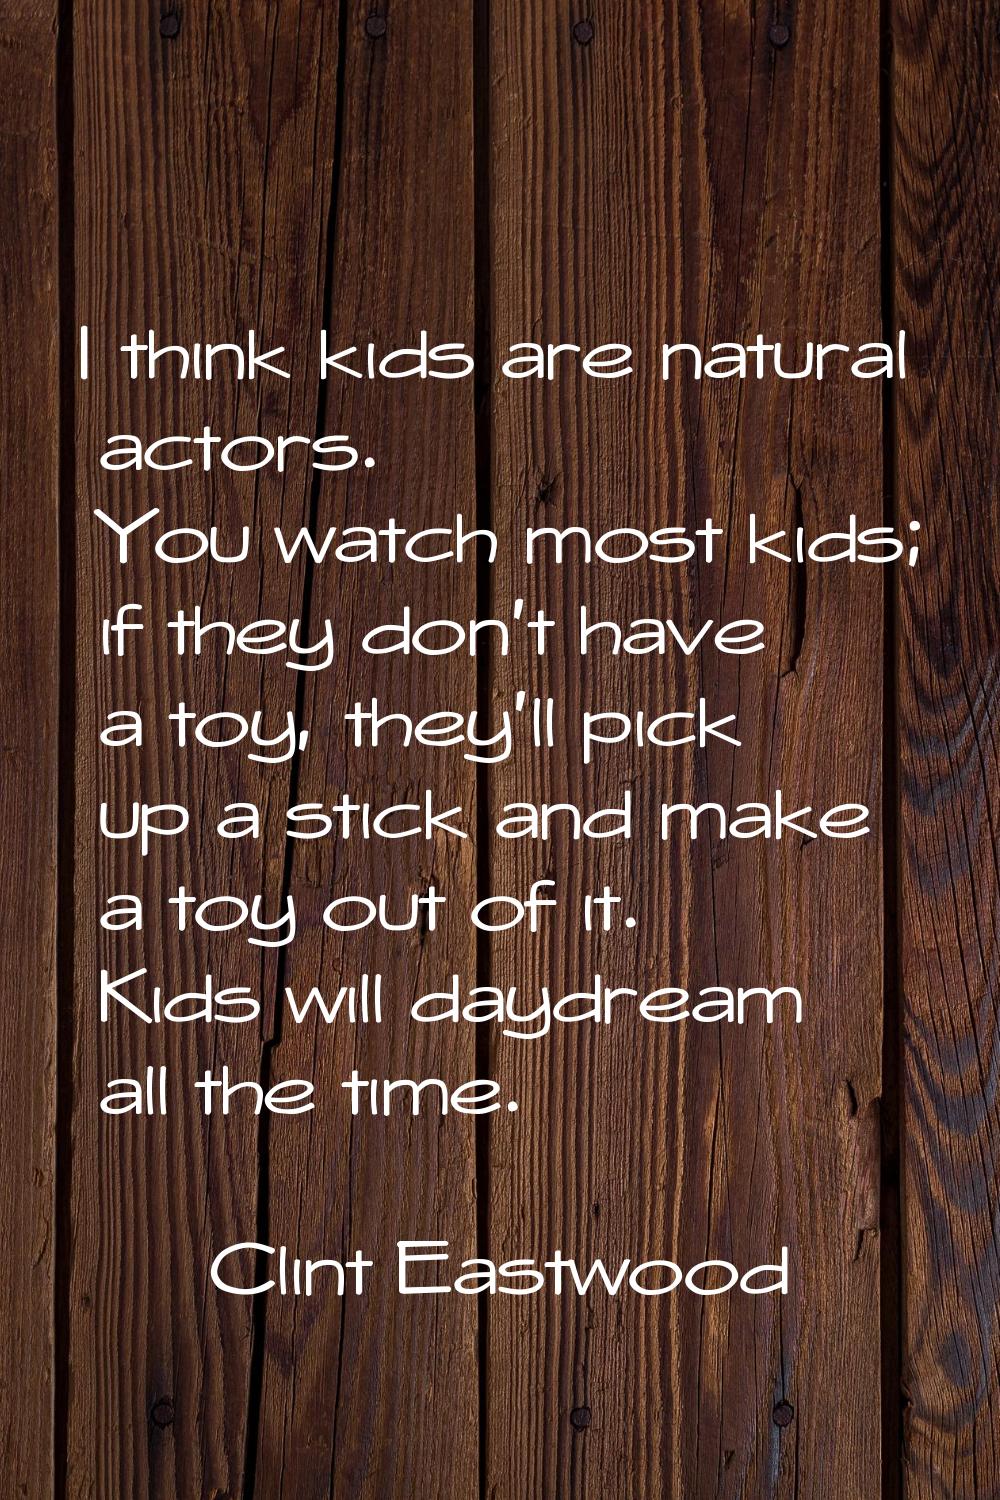 I think kids are natural actors. You watch most kids; if they don't have a toy, they'll pick up a s